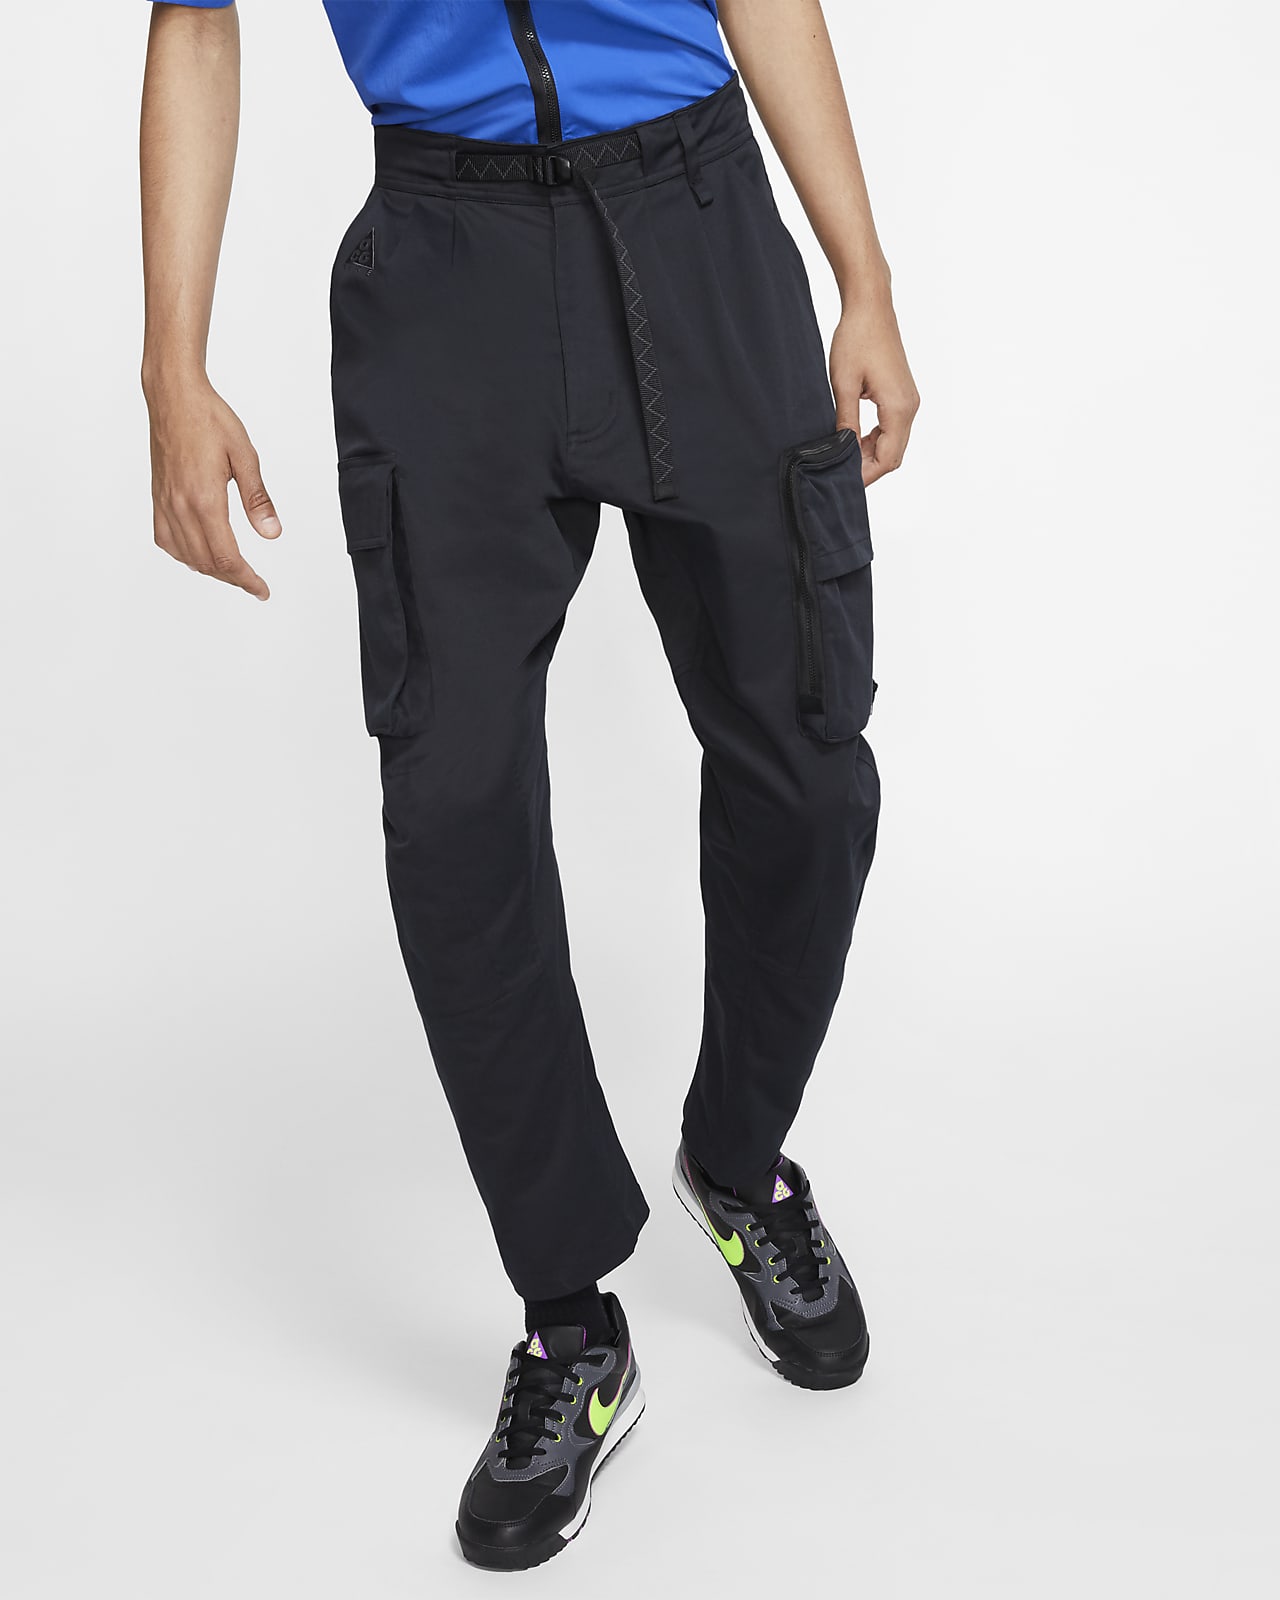 nike all conditions gear pants